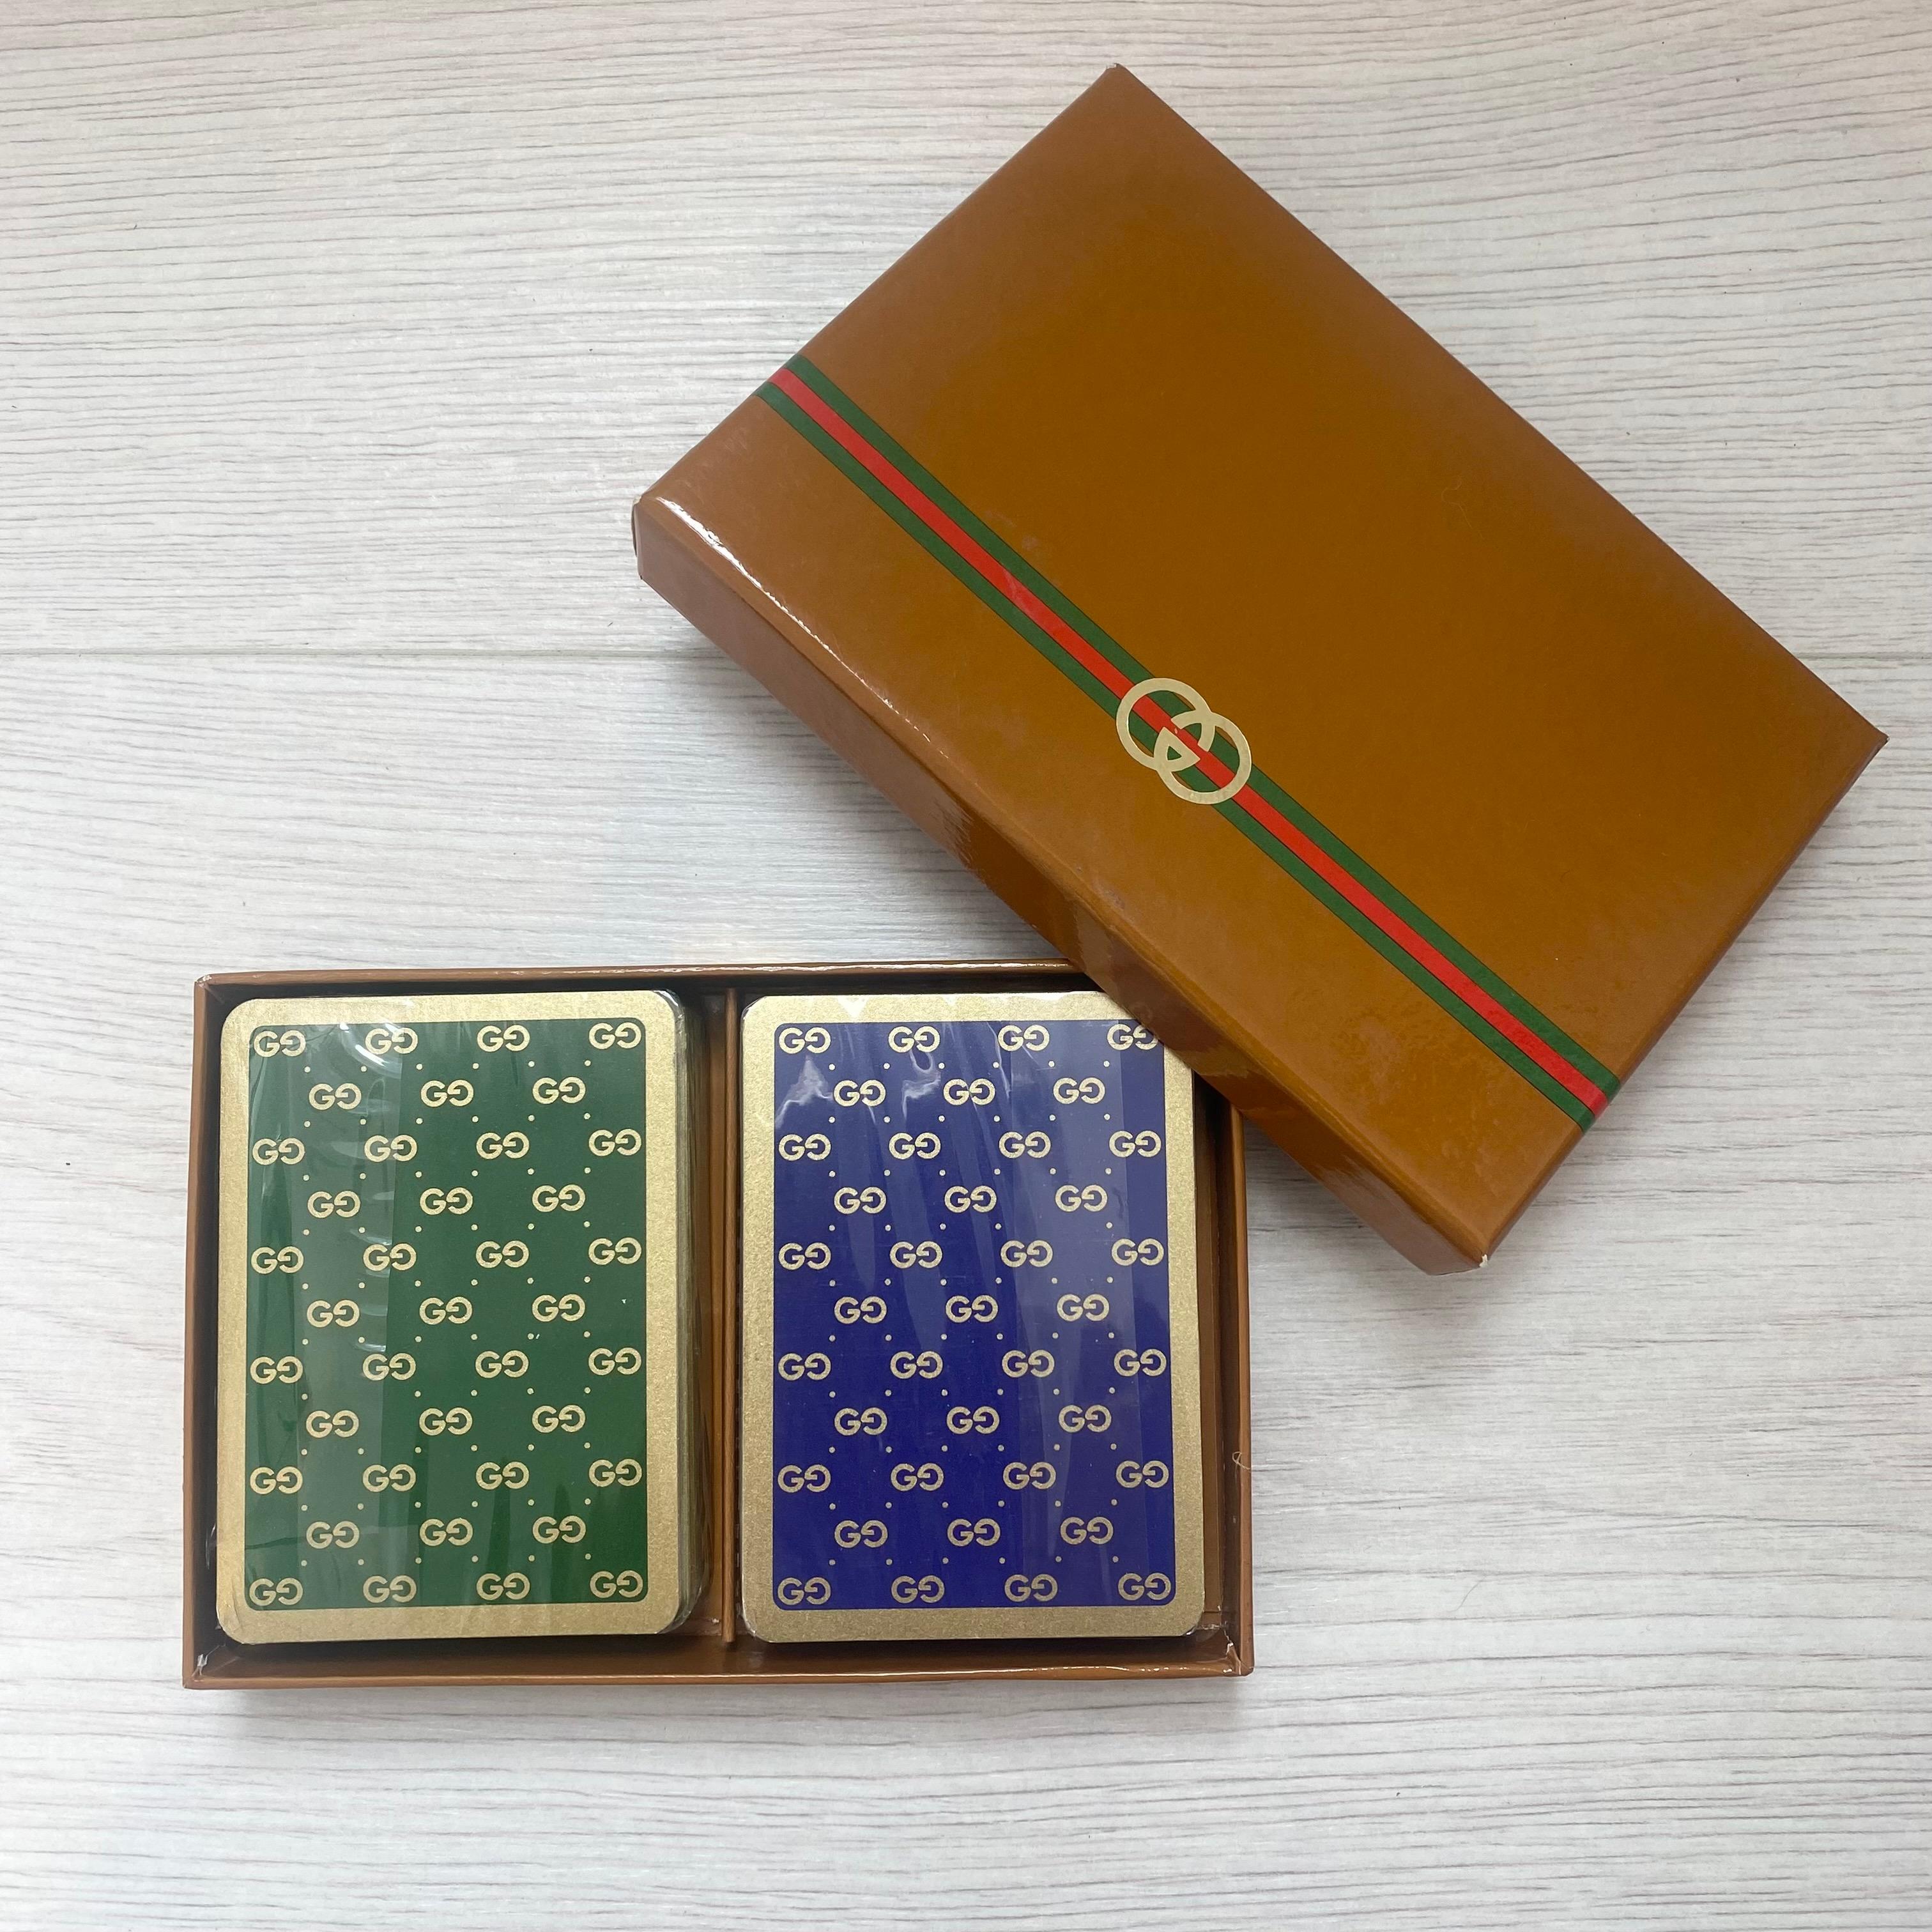 Rare Gucci playing cards in the original box. Cards are plastic and washable. Two complete decks with two jokers and a bridge card in French. Both sets still sealed in plastic and un-used. Makes a perfect gift for the Gucci collector. 